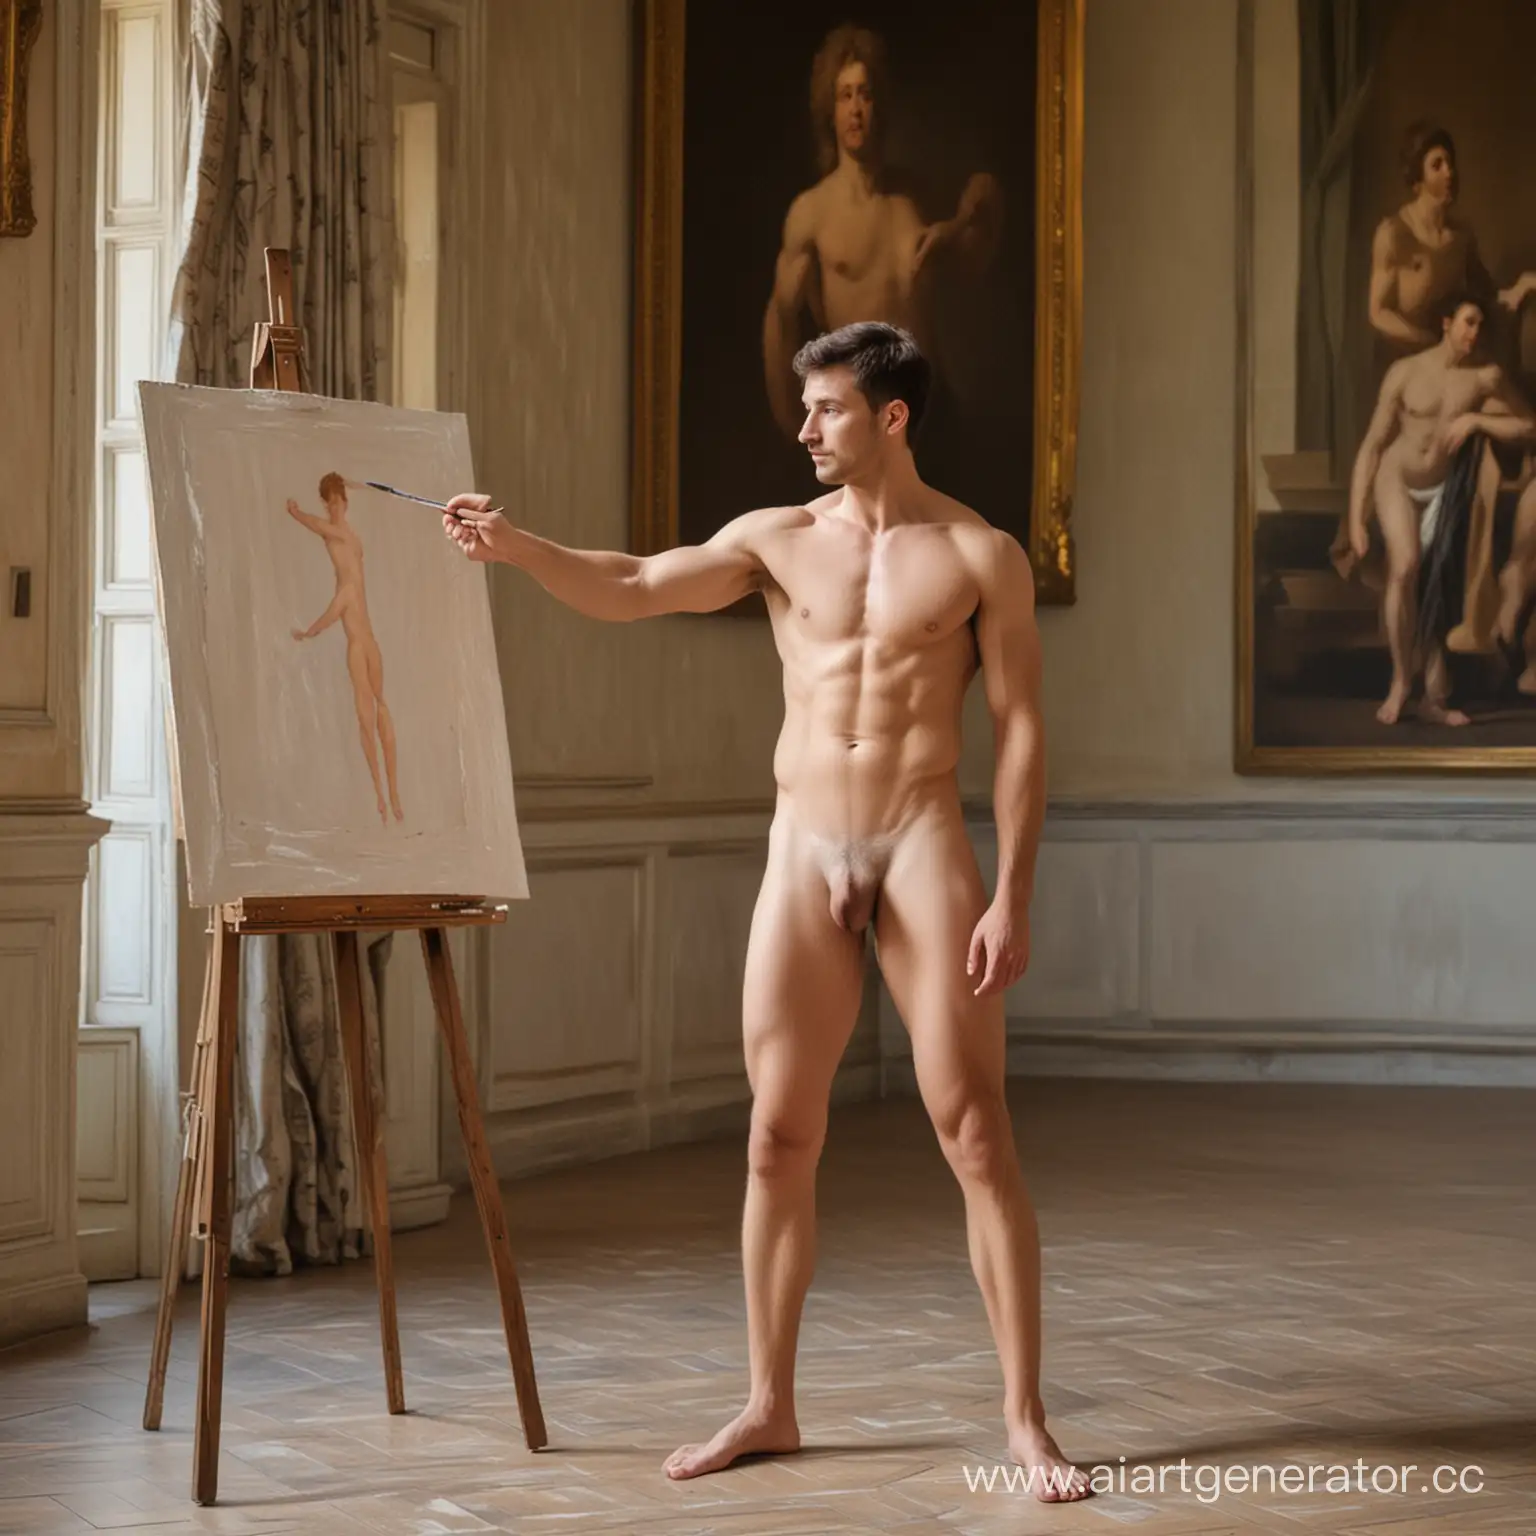 Nude-Male-Model-Poses-for-Royal-Portrait-in-Palace-Setting